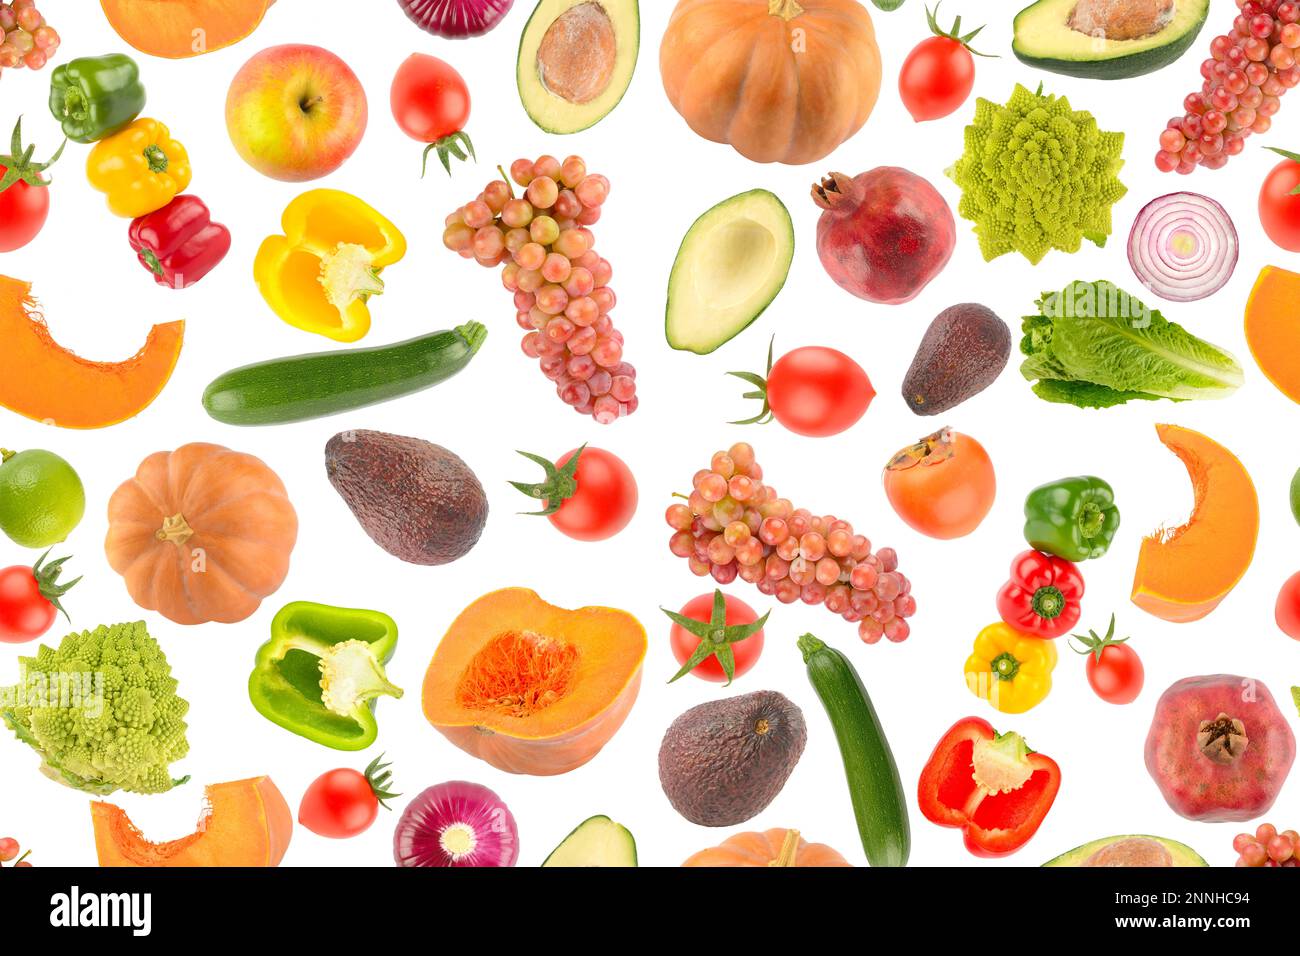 Fruit and vegetable seamless pattern isolated on white background. Food texture. Stock Photo